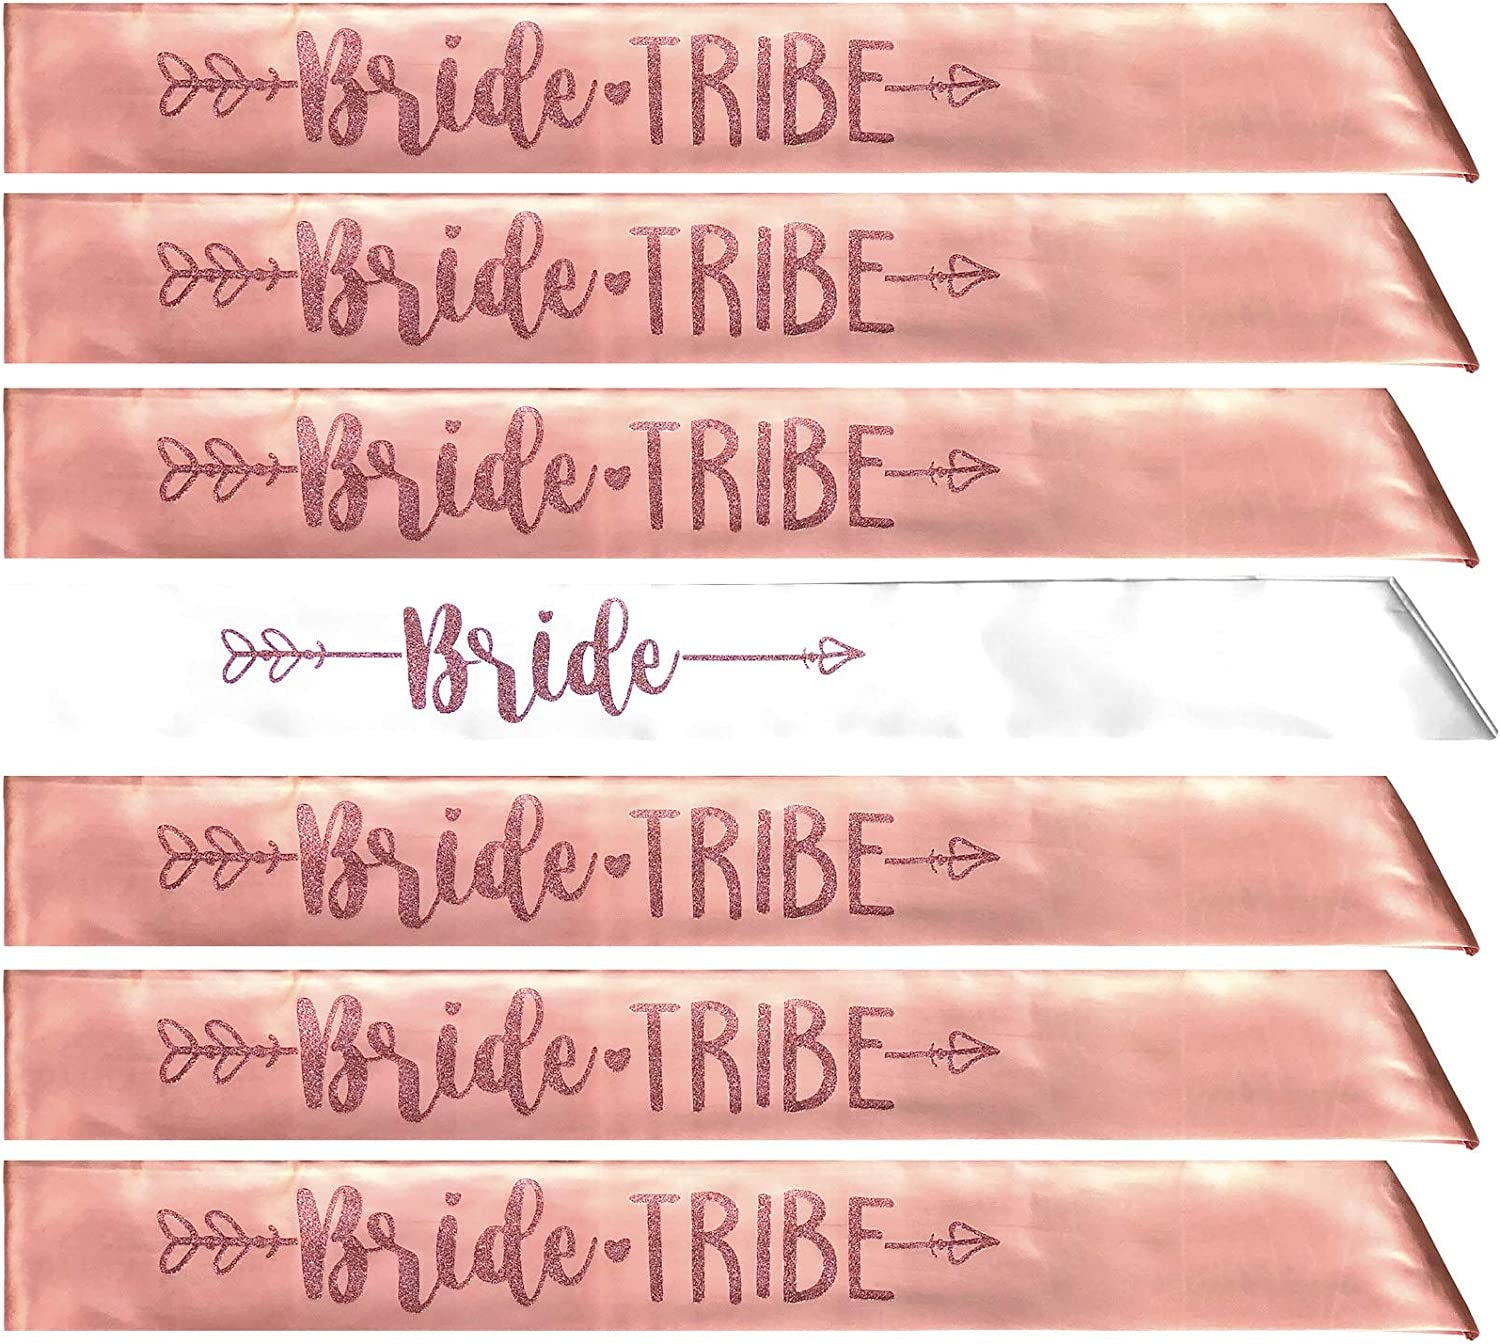 Bride Tribe 7Pc or 10Pc Satin Sash Set - Sophisticated & Fun Party Favors for Bachelorette Party, Bridal Shower & Wedding Party (Rose Gold, 7Pc Set)